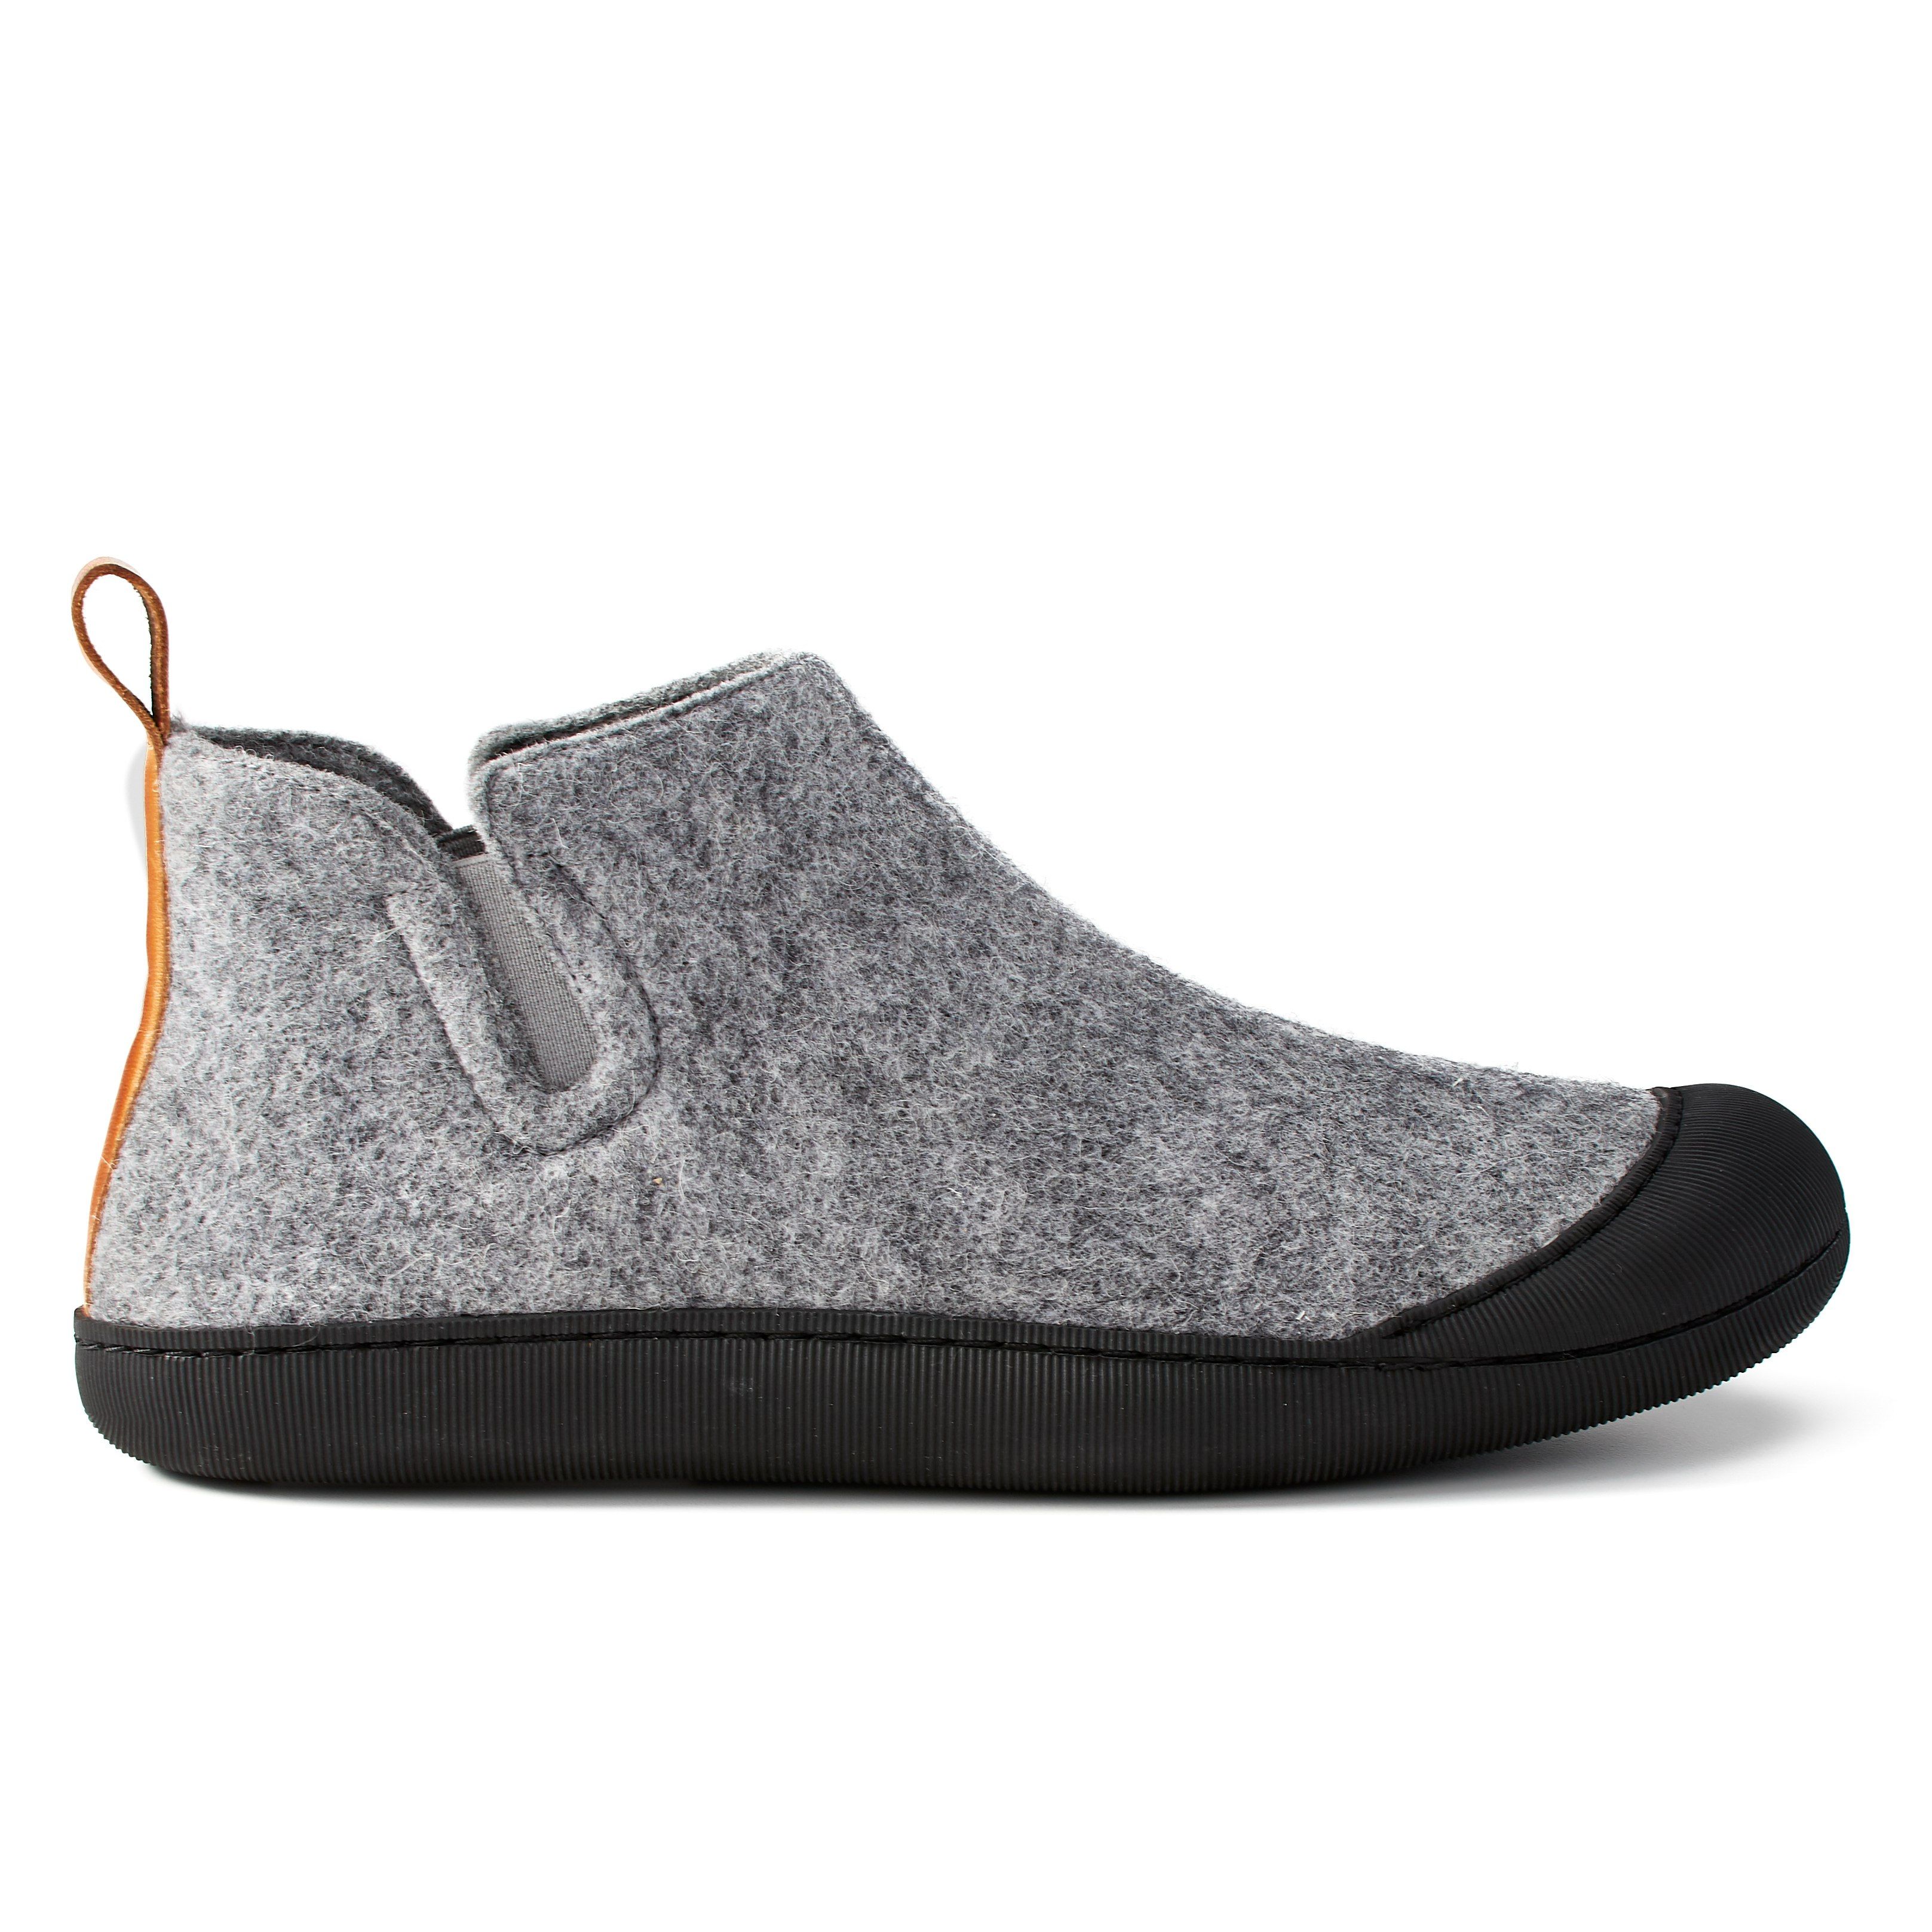 The Outdoors Slipper Boot